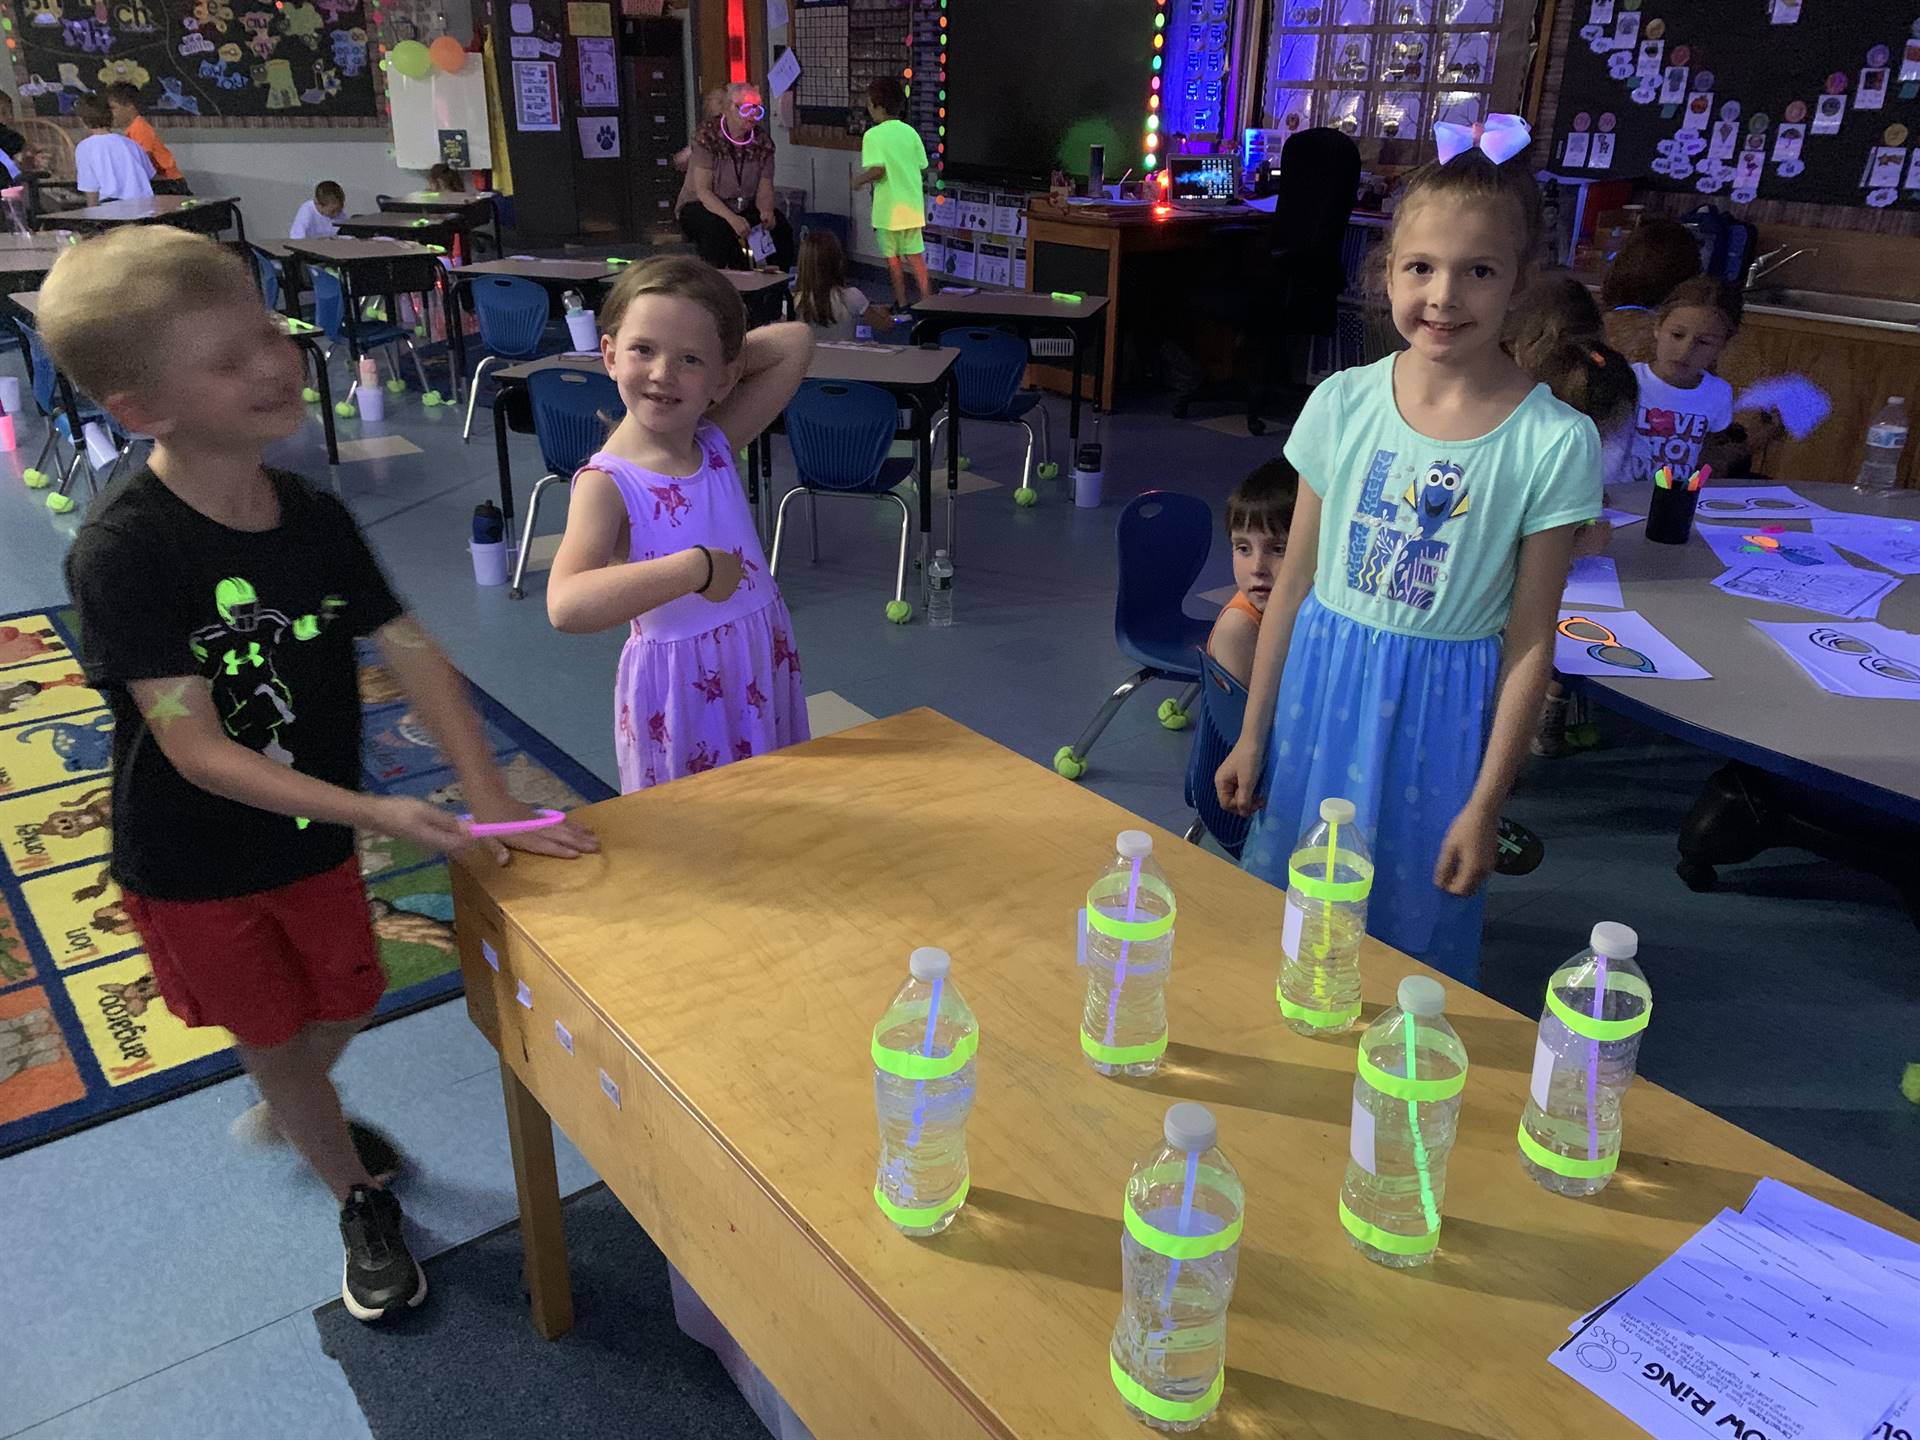 3 students playing a glow day game with bottles and straws.